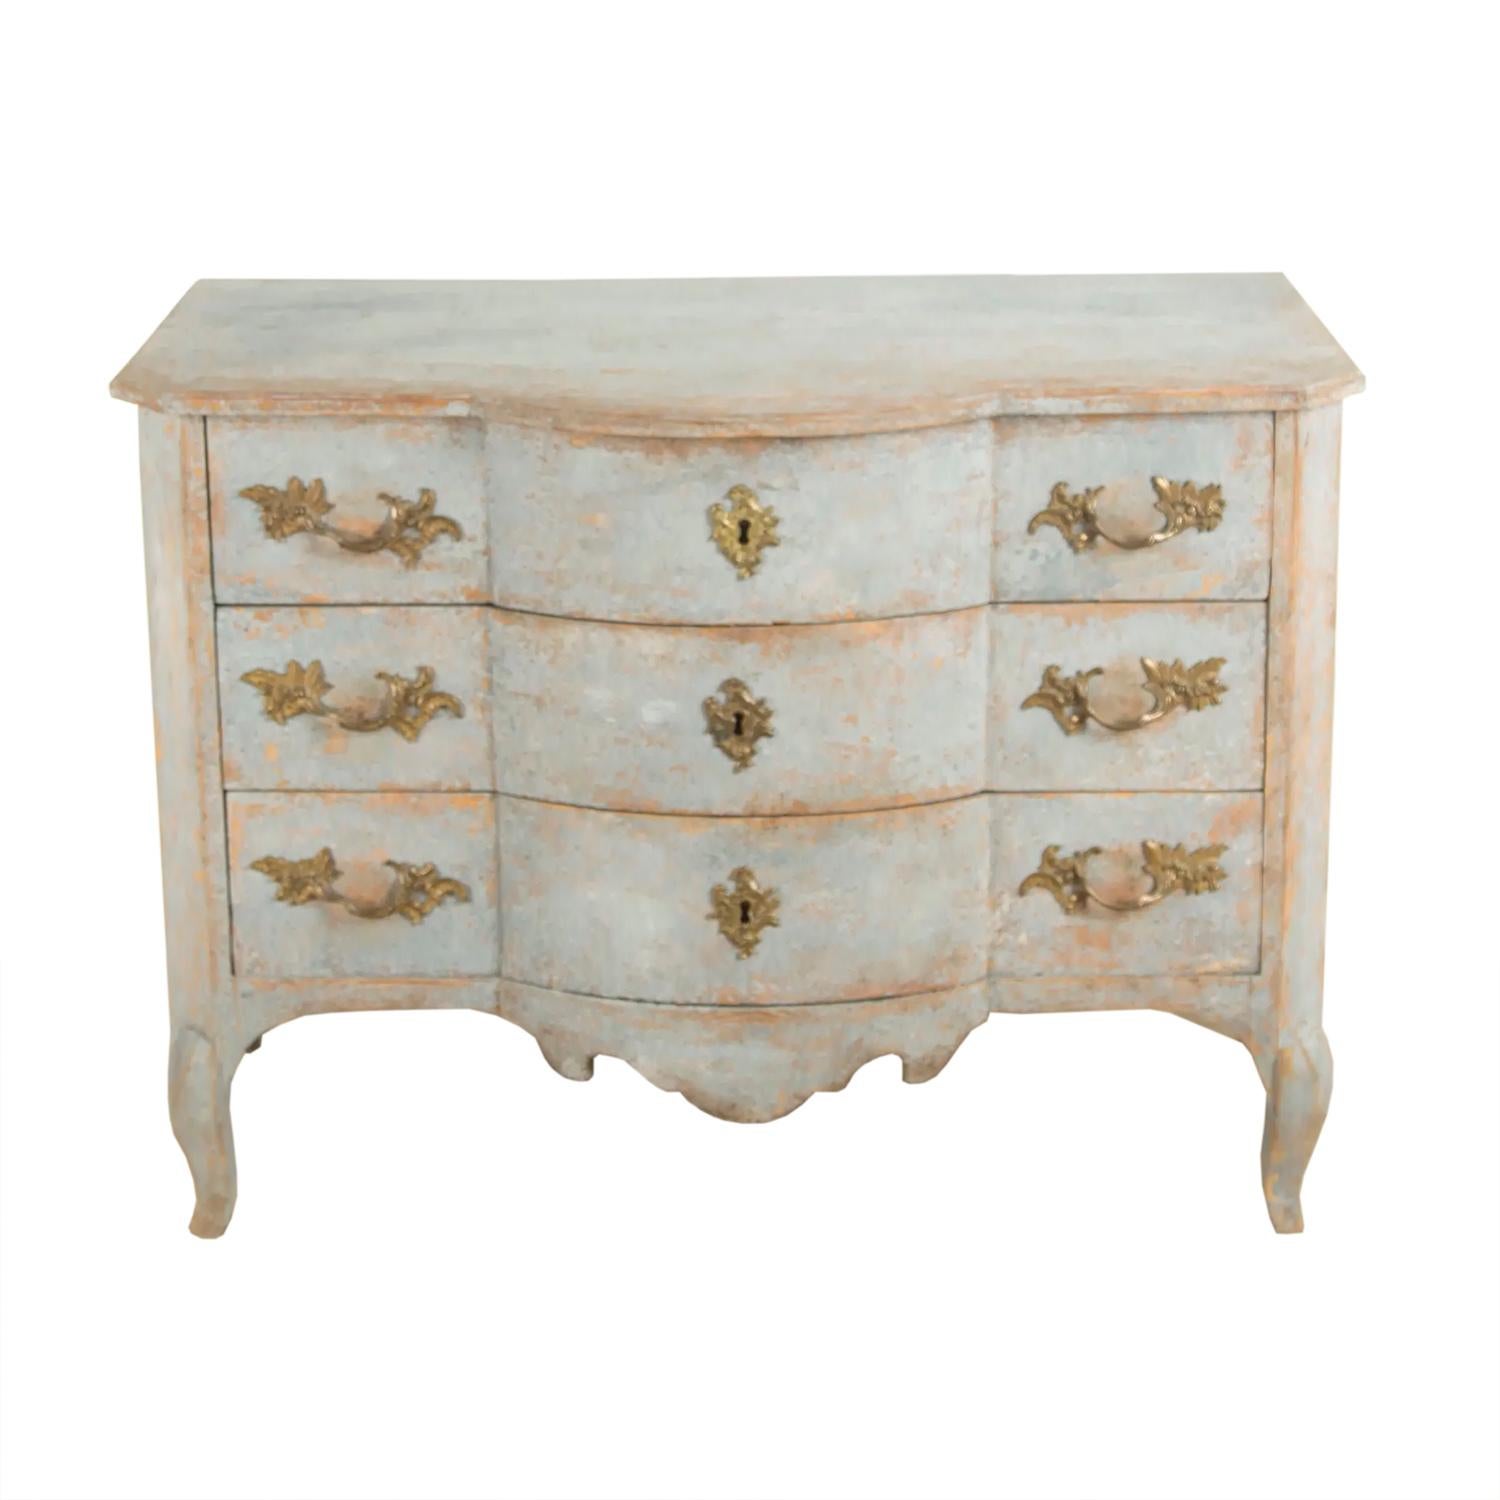 This 18th century Rococo commode features a bow front to the top and three long storage drawers, each with two ornate handles and keyhole. The commode tapers to cabriolet legs. This piece has been repainted, with original hardware.